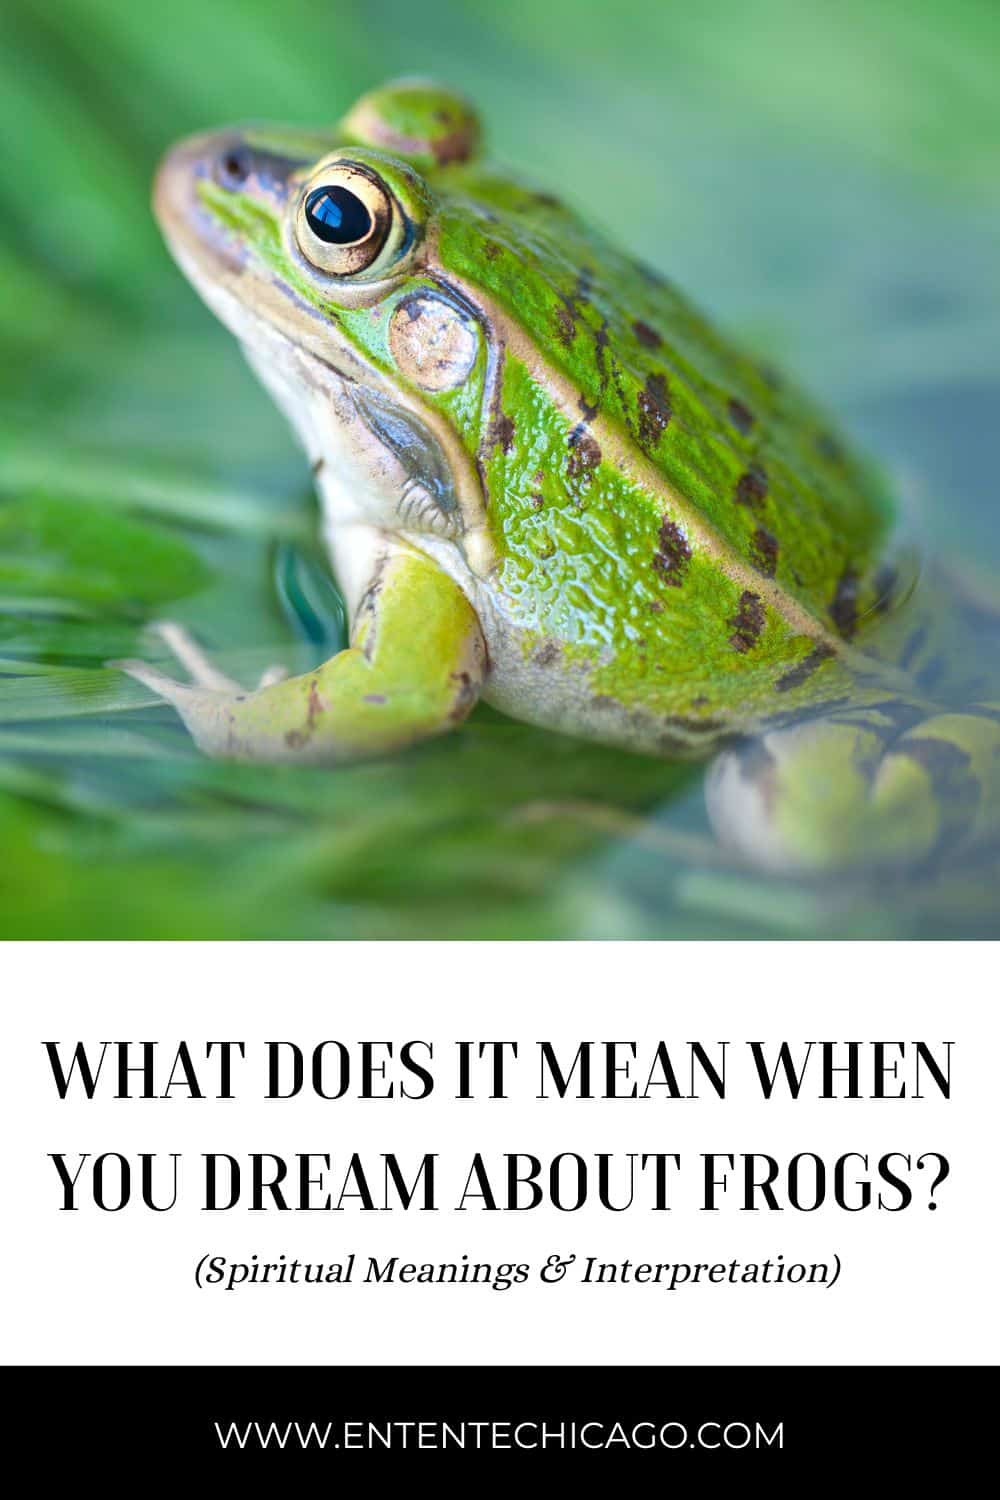 What Does it Mean to Dream About Frogs